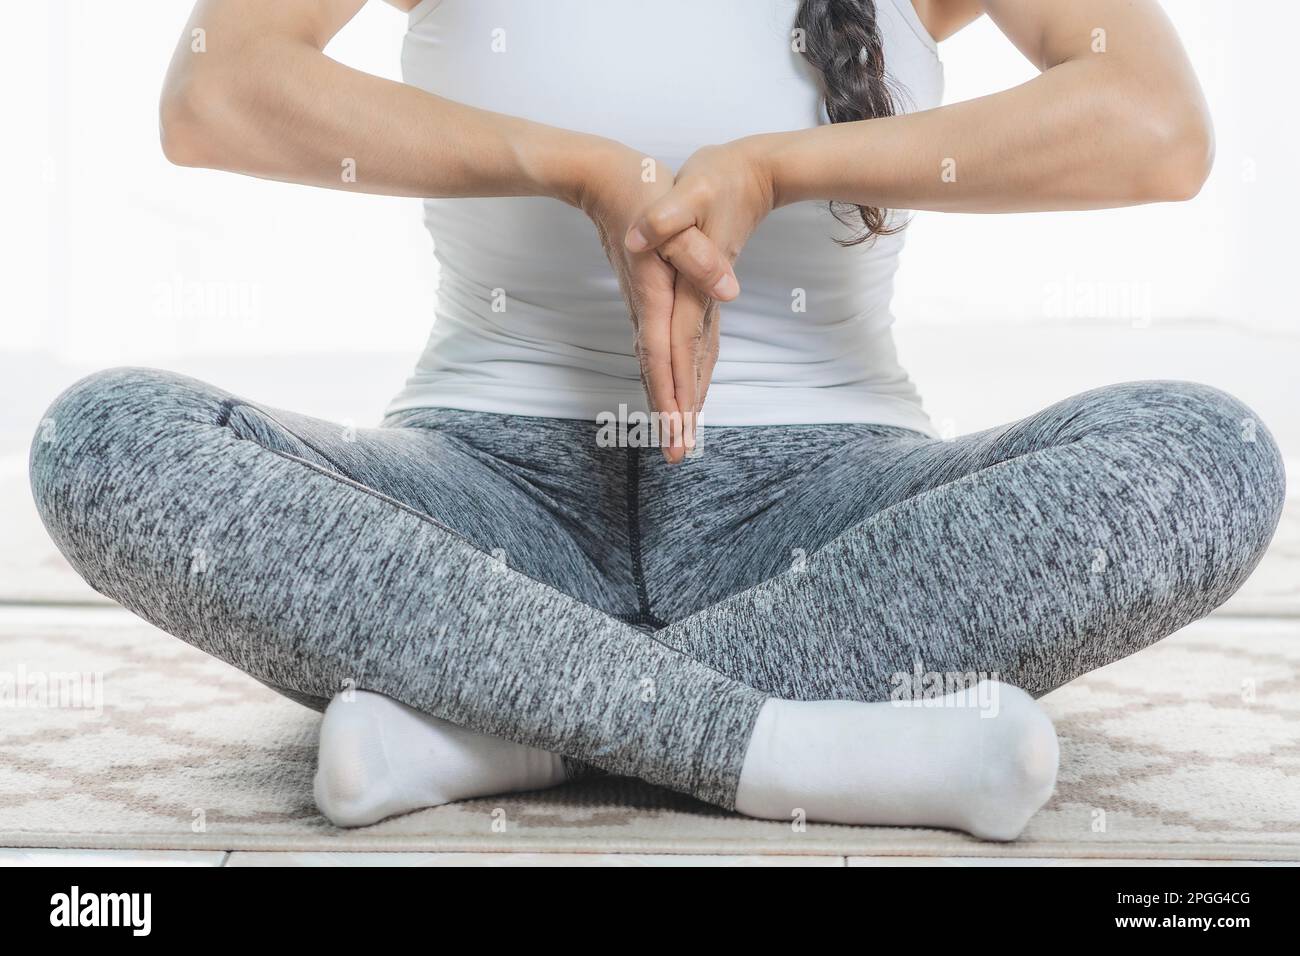 Woman does Yoga indoors, close-up, does deep meditation postures. It is very quiet. Stock Photo